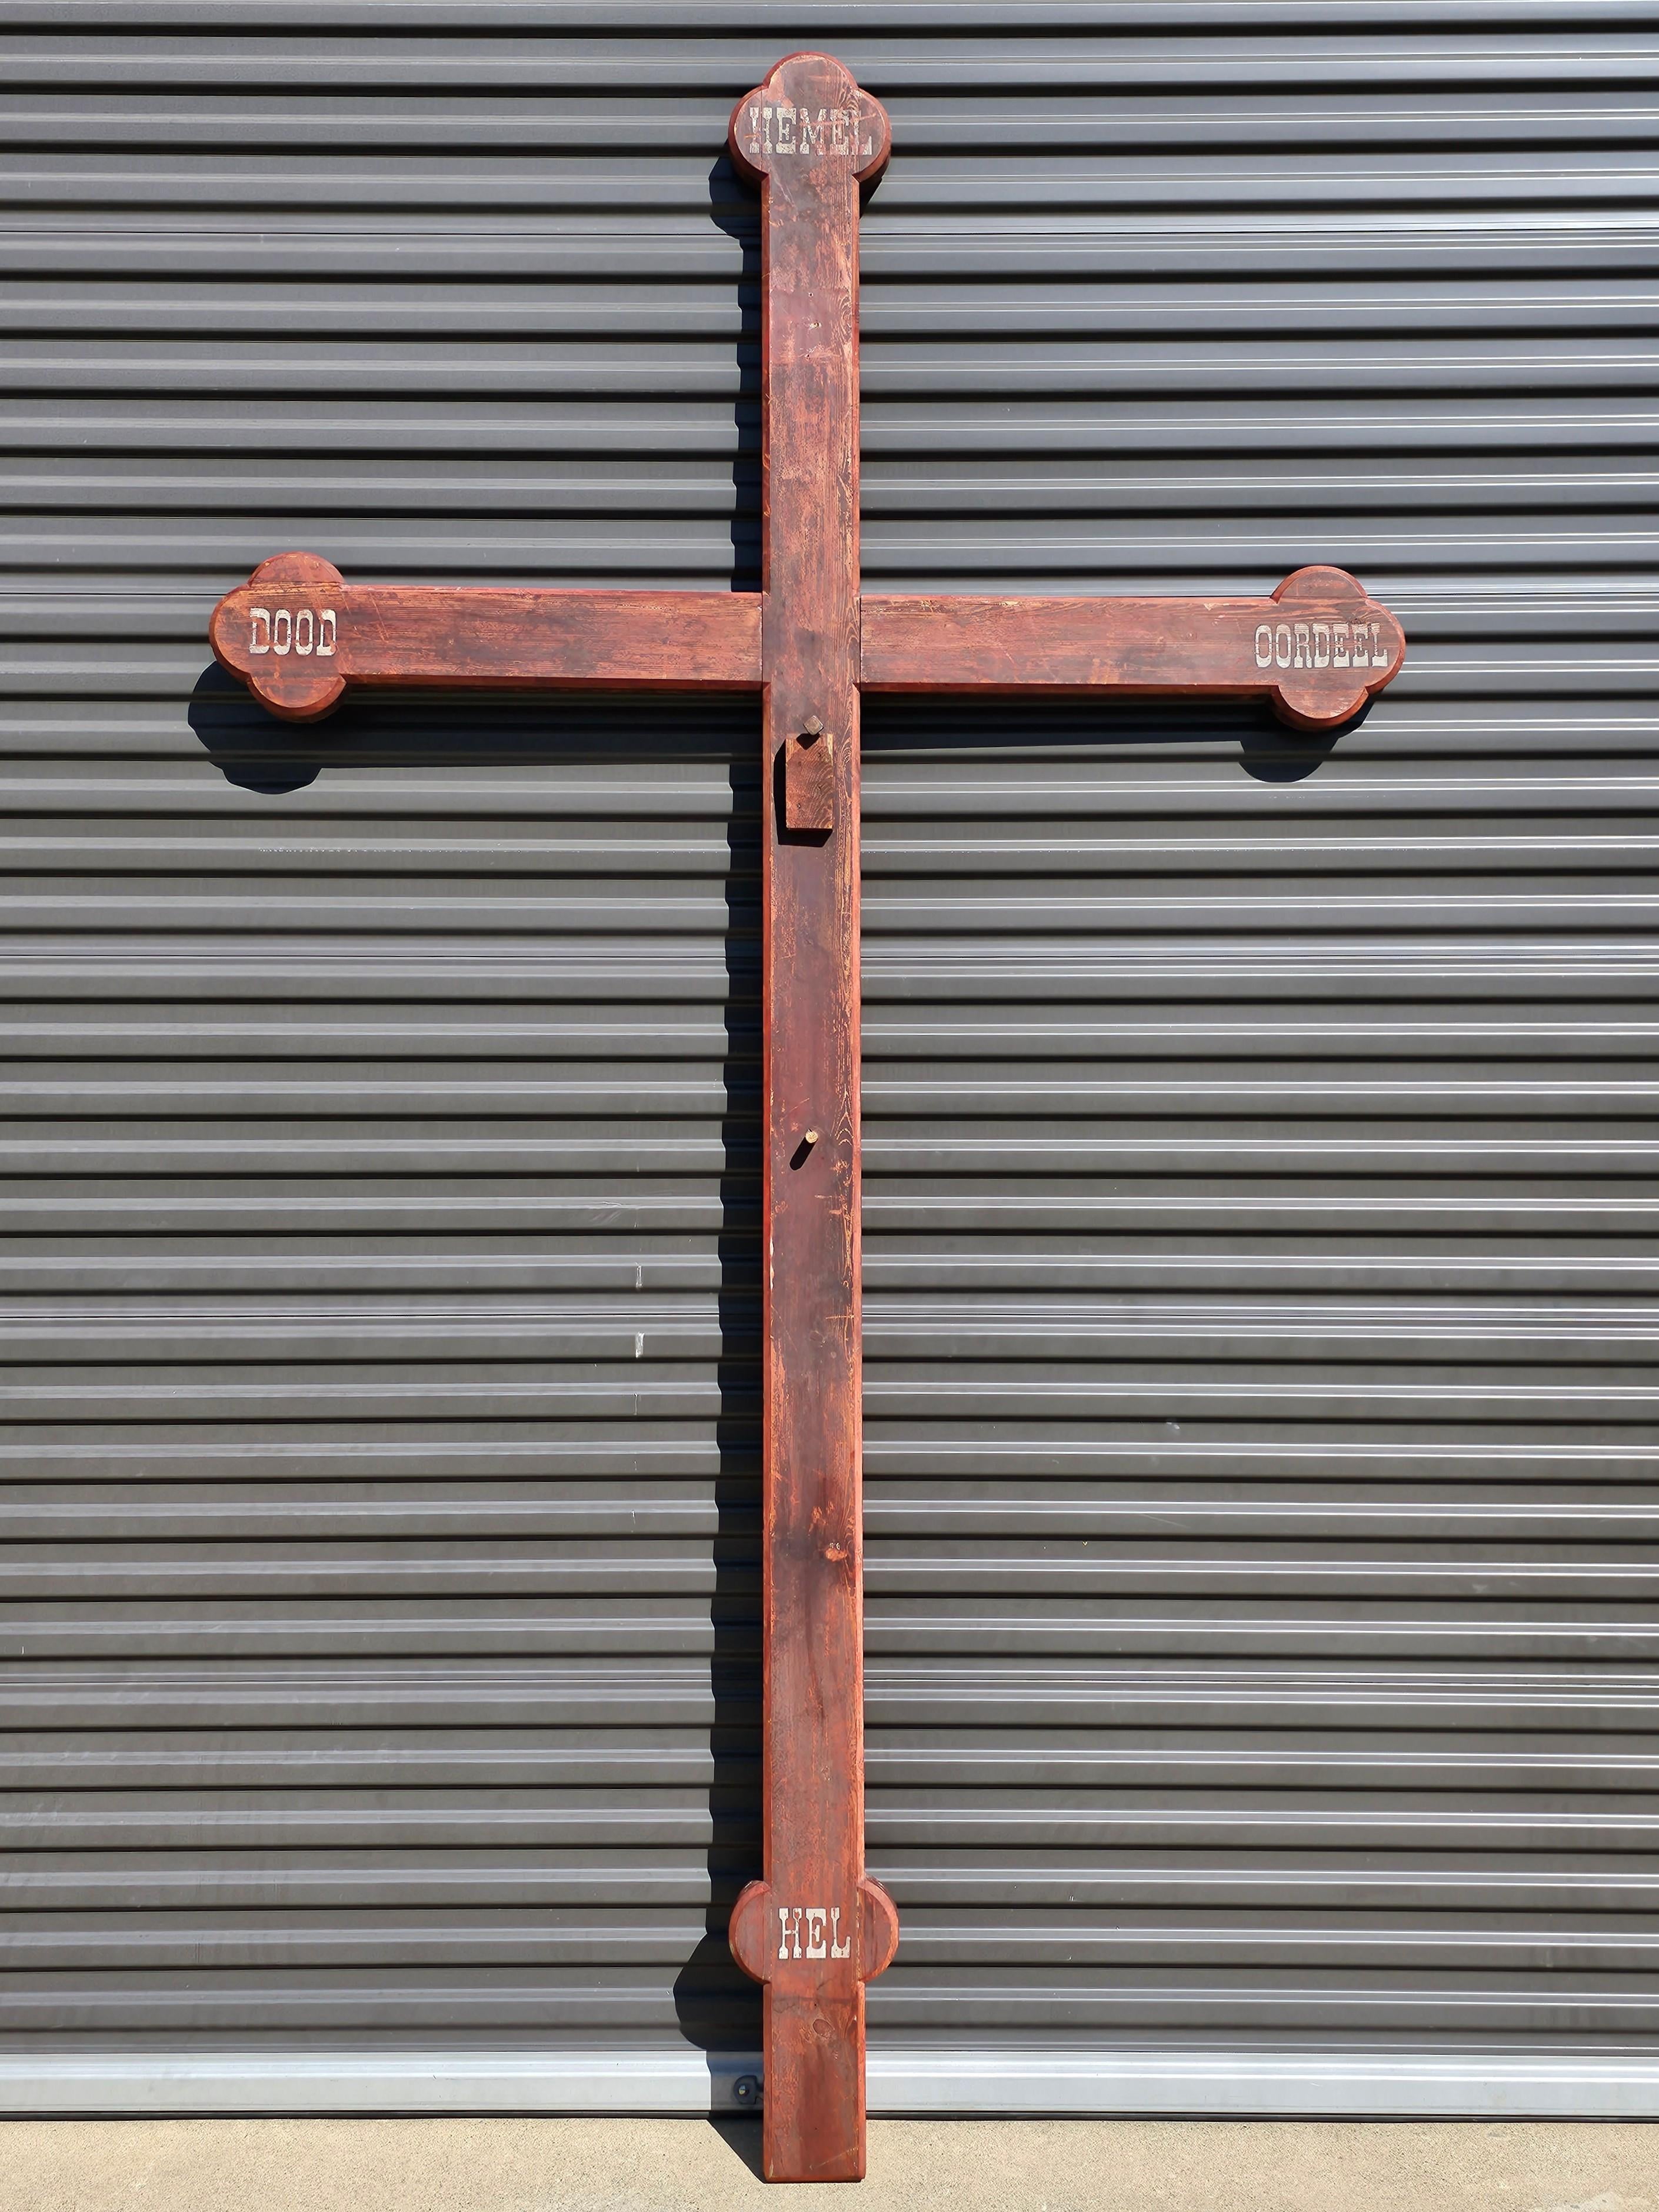 A massive nearly 10 foot tall by 5.5 foot wide antique Dutch ecclesiastical wooden cross.

Hand-crafted in the Netherlands in the 19th century, very large sculptural Celtic cross form, originally mounted as a crucifix, featuring the original red